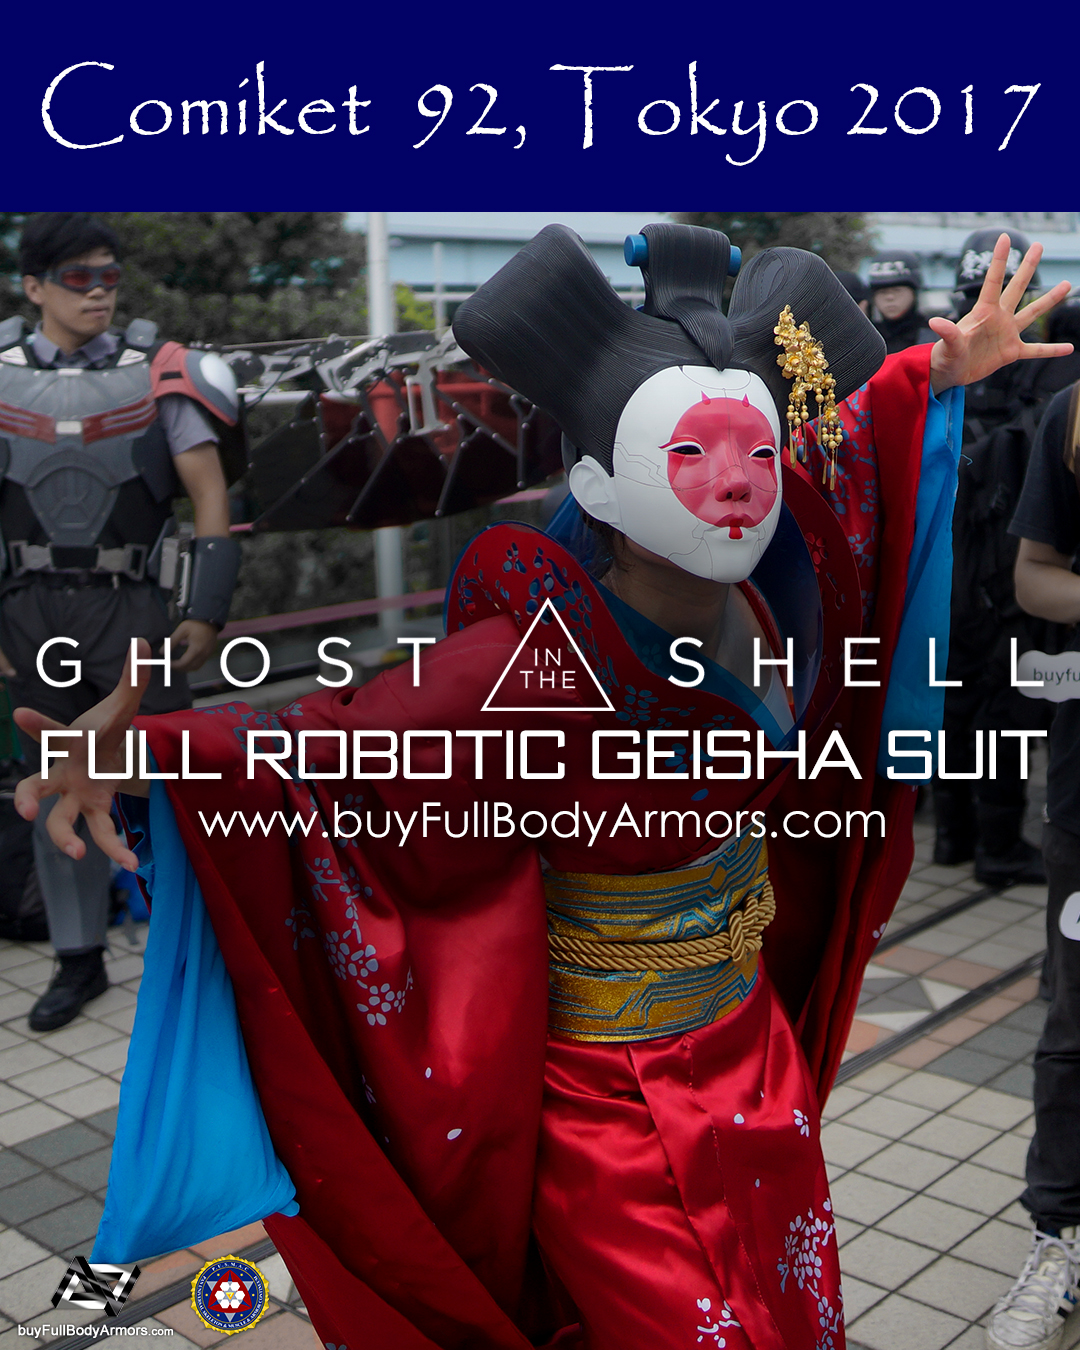 [Comiket 92, Tokyo 2017] The Wearable Robotic Geisha Full Suit from the Movie Ghost in the Shell 2017 4